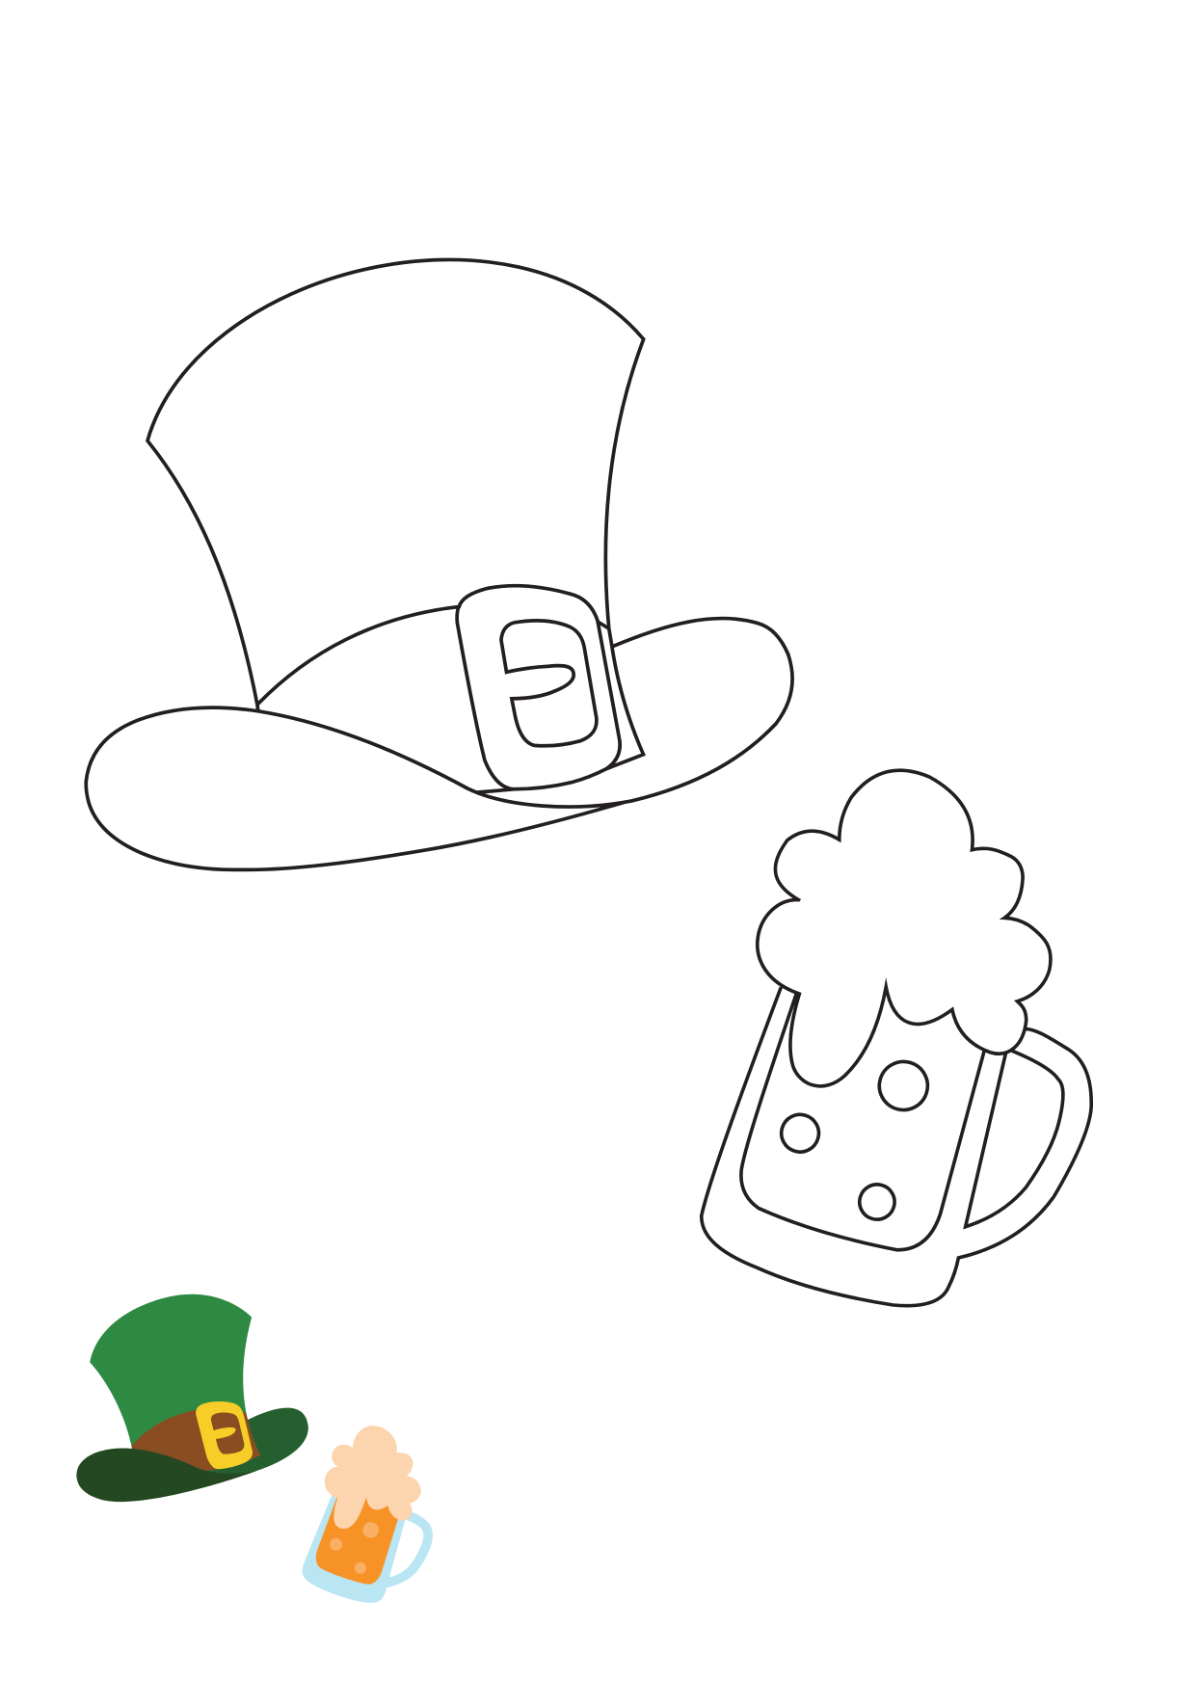 Happy St. Patrick’s Day Coloring Page Template